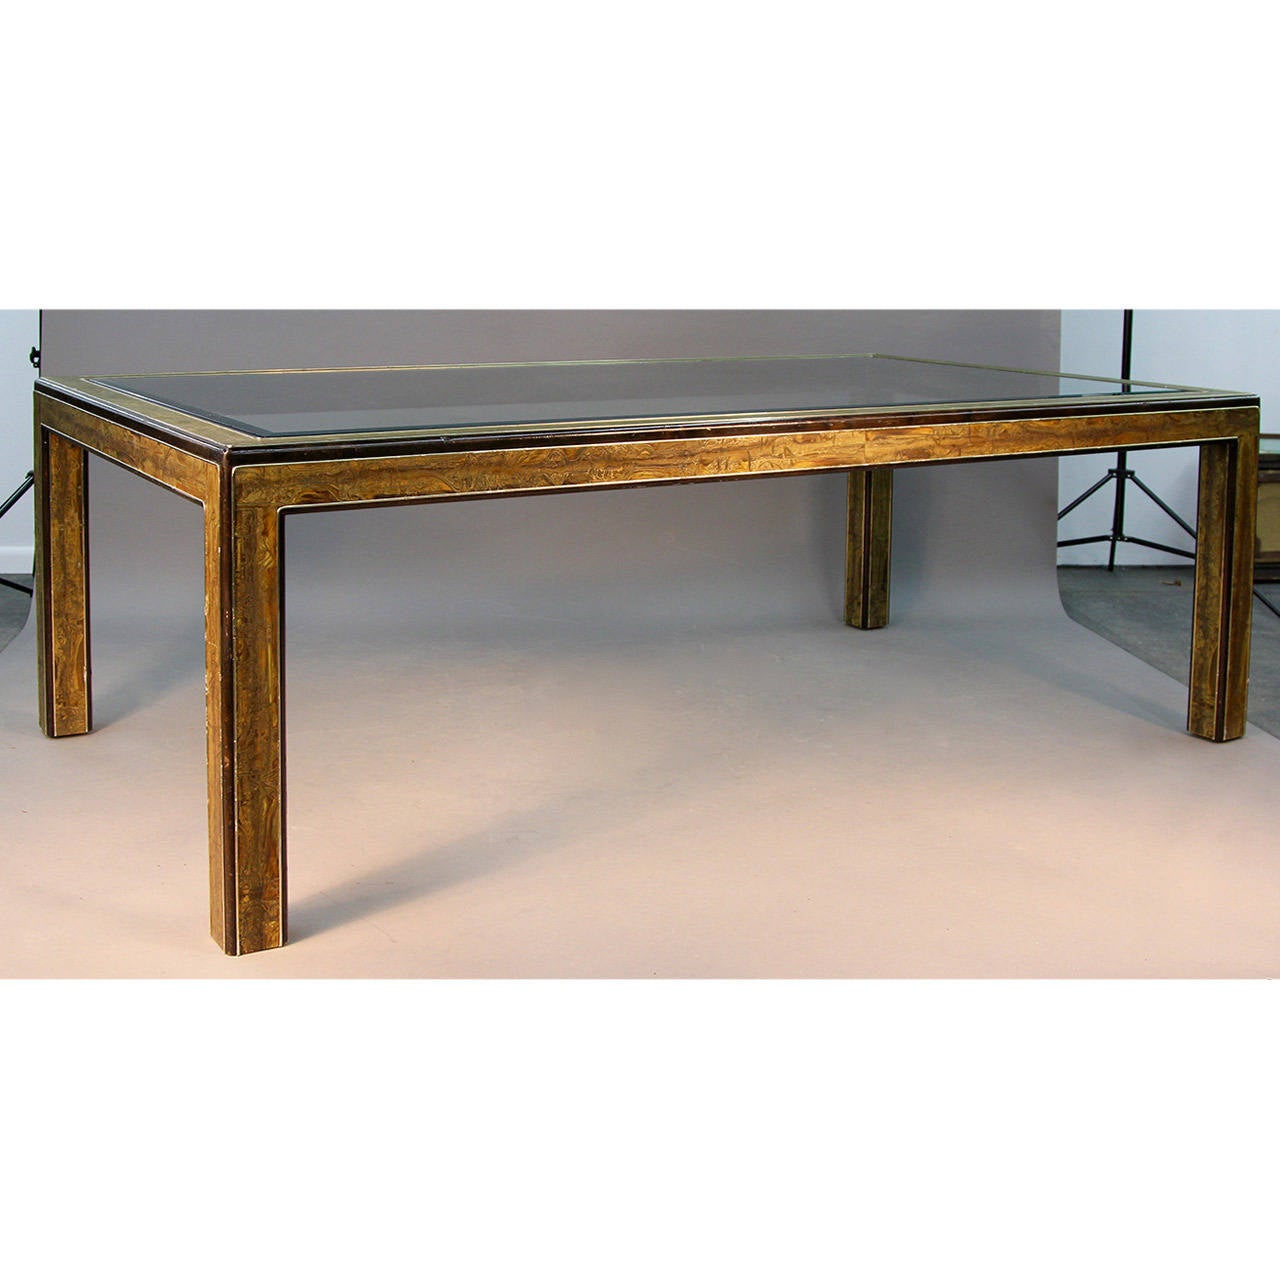 Incredible dining table designed by Bernhard Rohne for Mastercraft. Acid etches brass over wood and beveled glass insert. Incredible style and unique find.